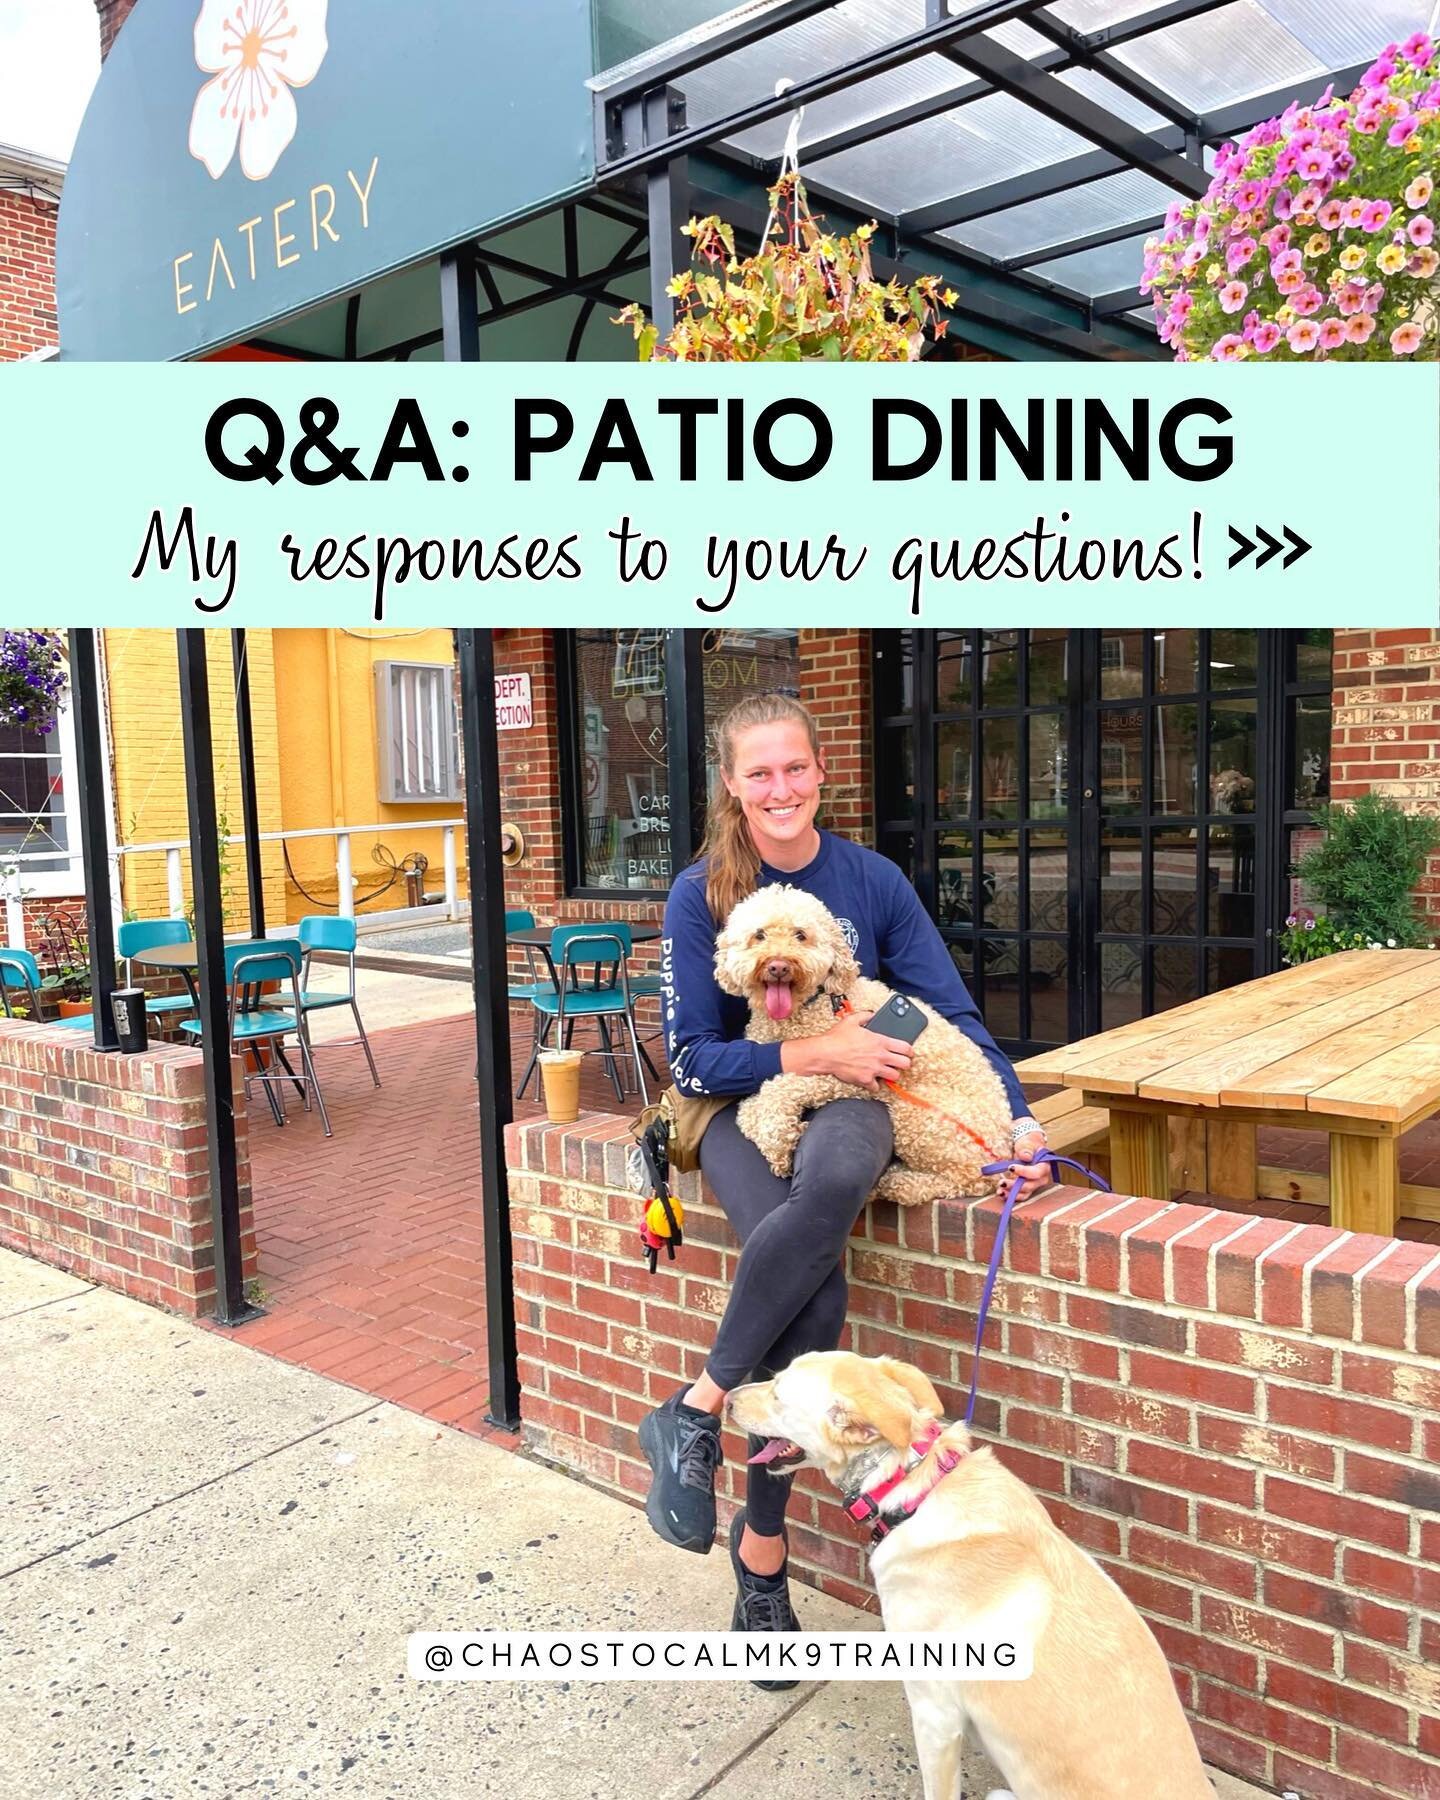 Swipe through for tips on dining out with your pups!

A few days ago in stories, I asked what questions you had about including your dog in patio dining.

This post shares your questions&hellip; and my answers!

My advice boils down to this:

✨Before